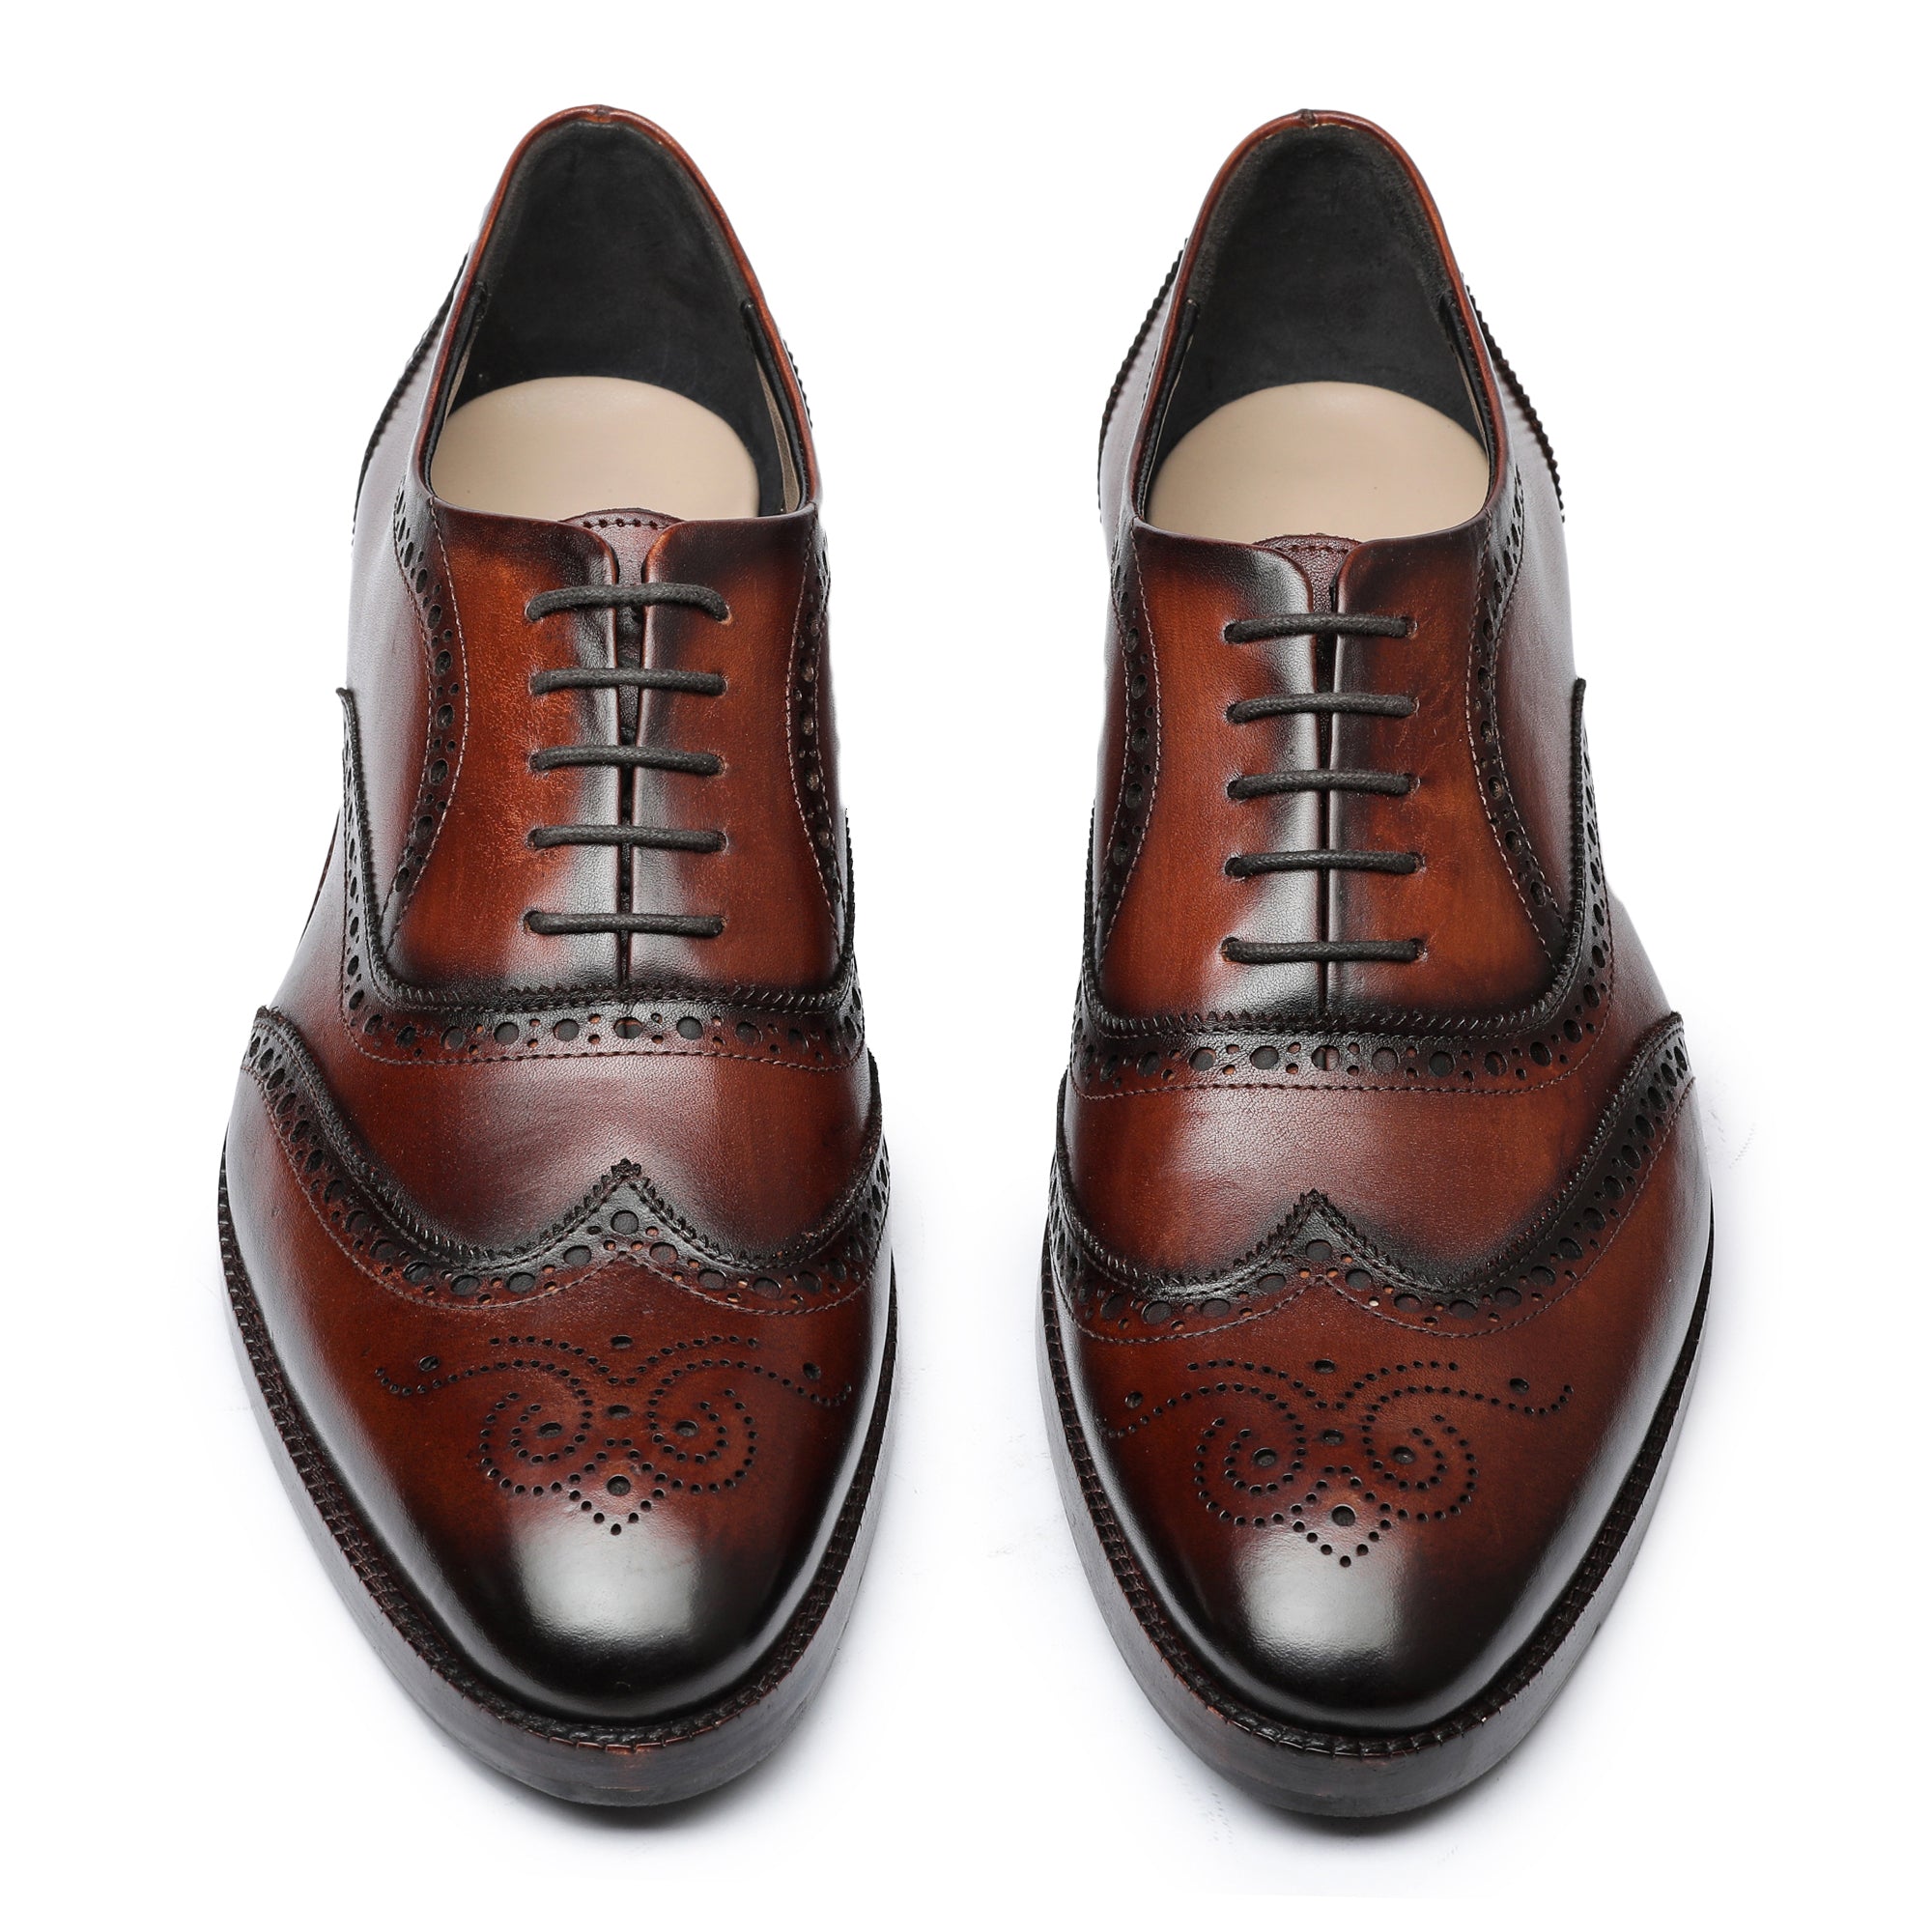 1966 Luis Gonzalo Leather Wingtip Lace-Up Oxford Dress Shoes Brown